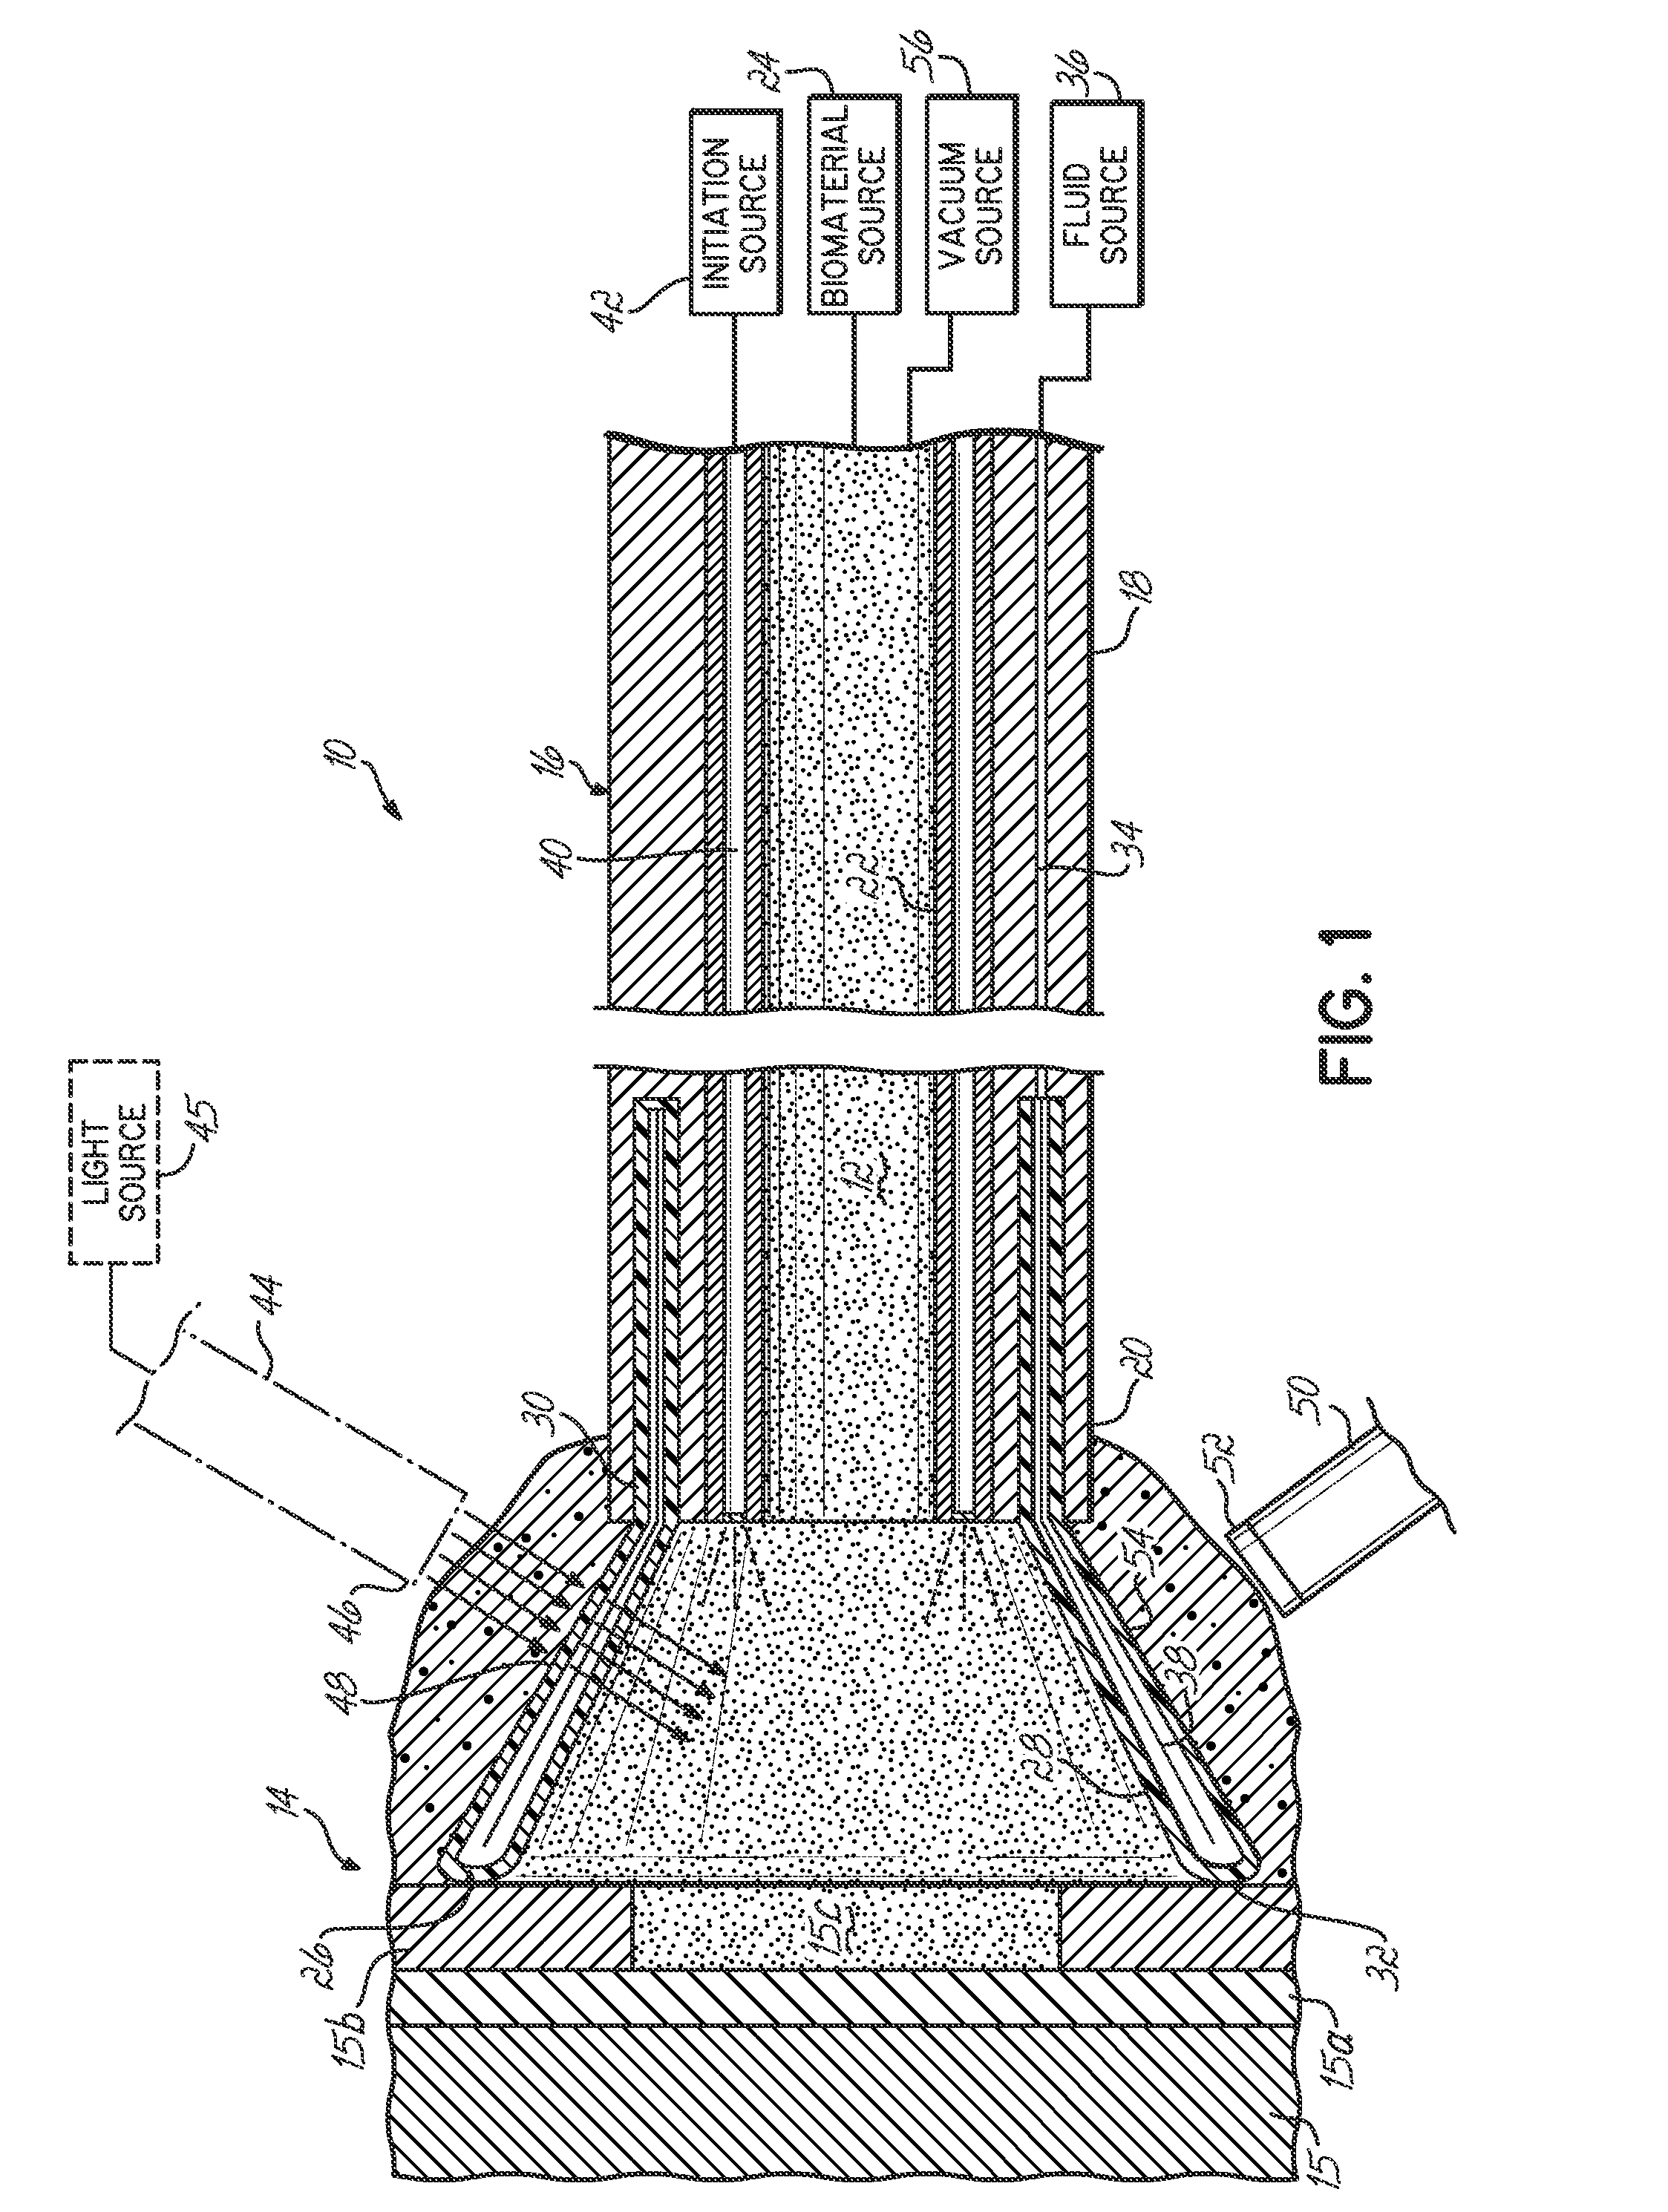 Apparatus for delivering a biocompatible material to a surgical site and method of using same